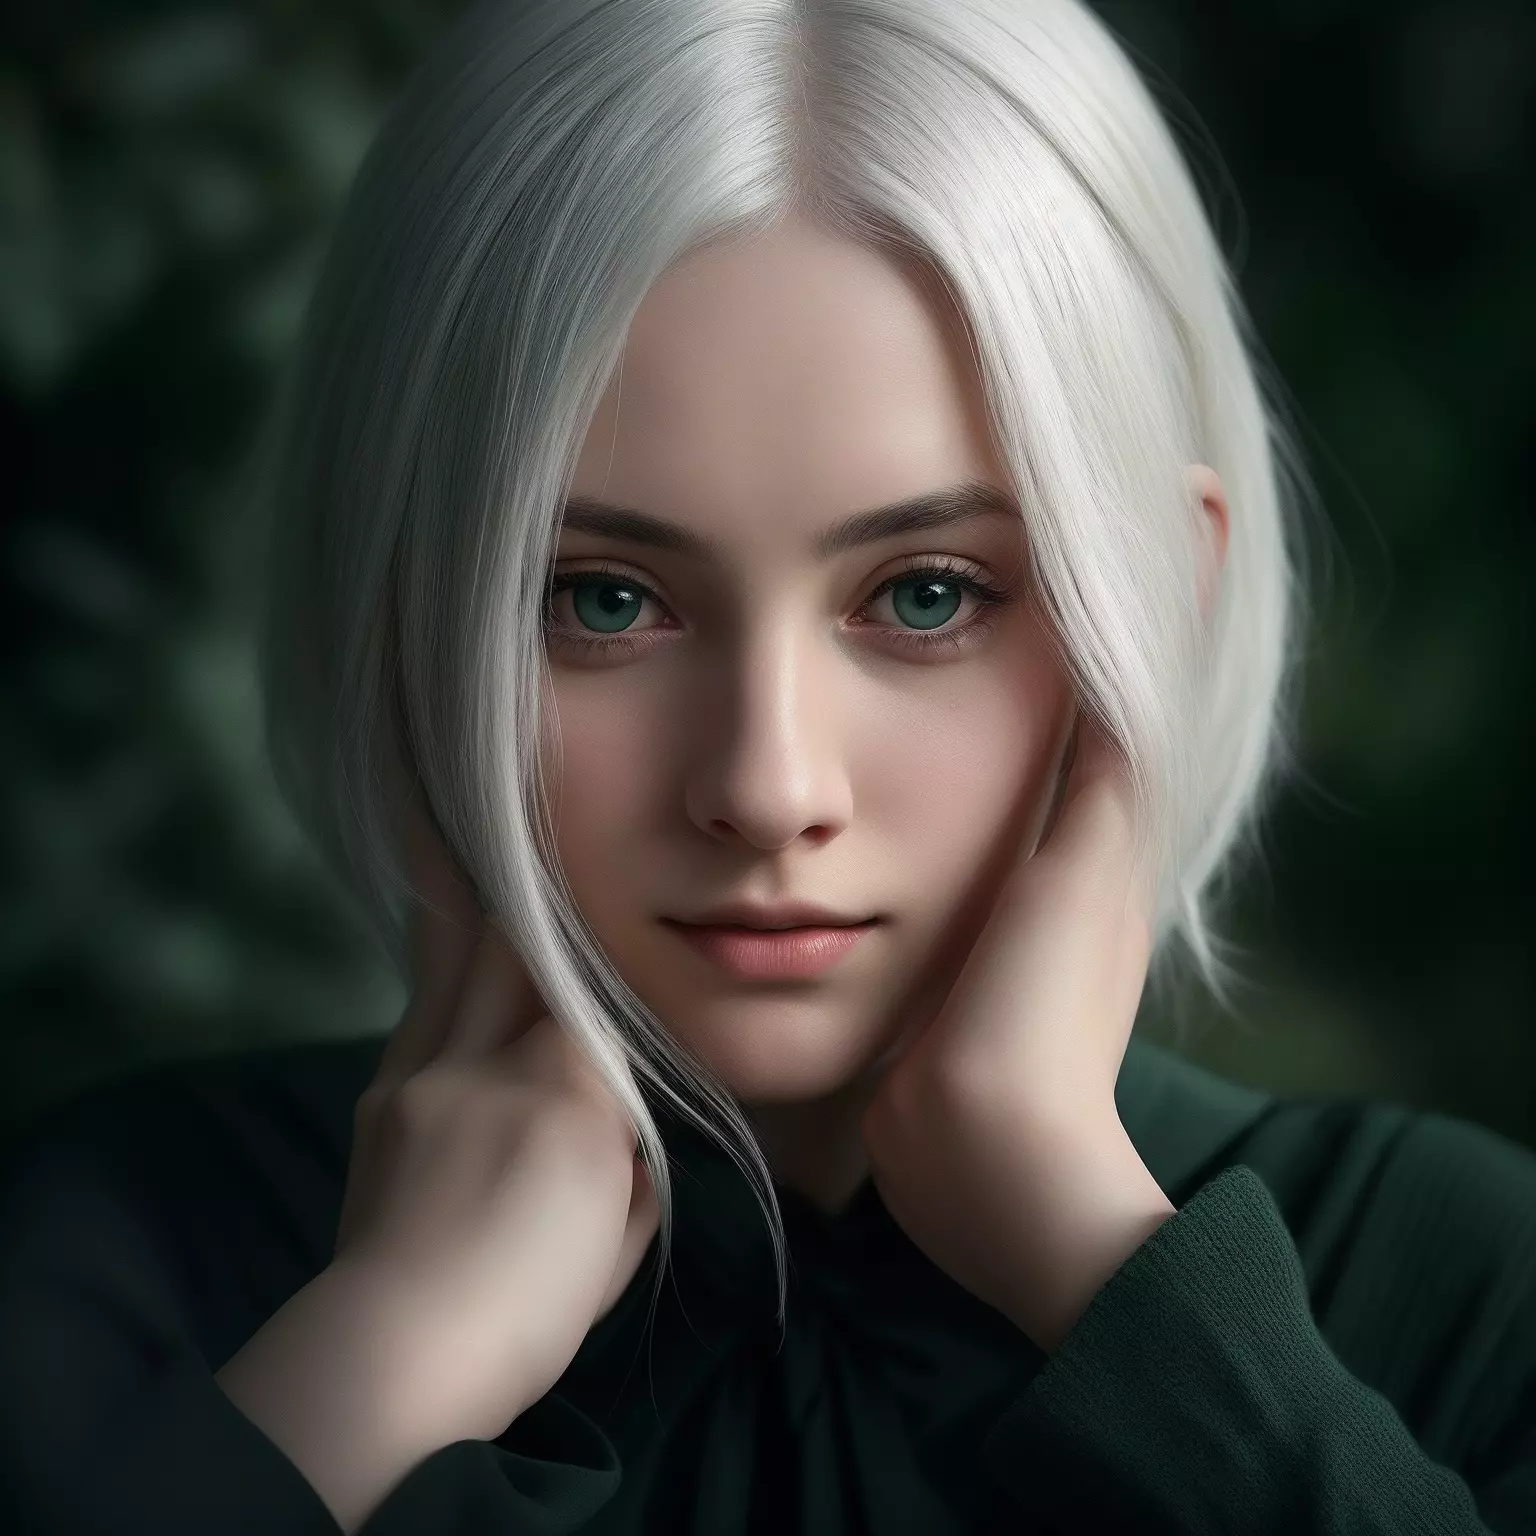 Woman with white hair and green eyes touching her face